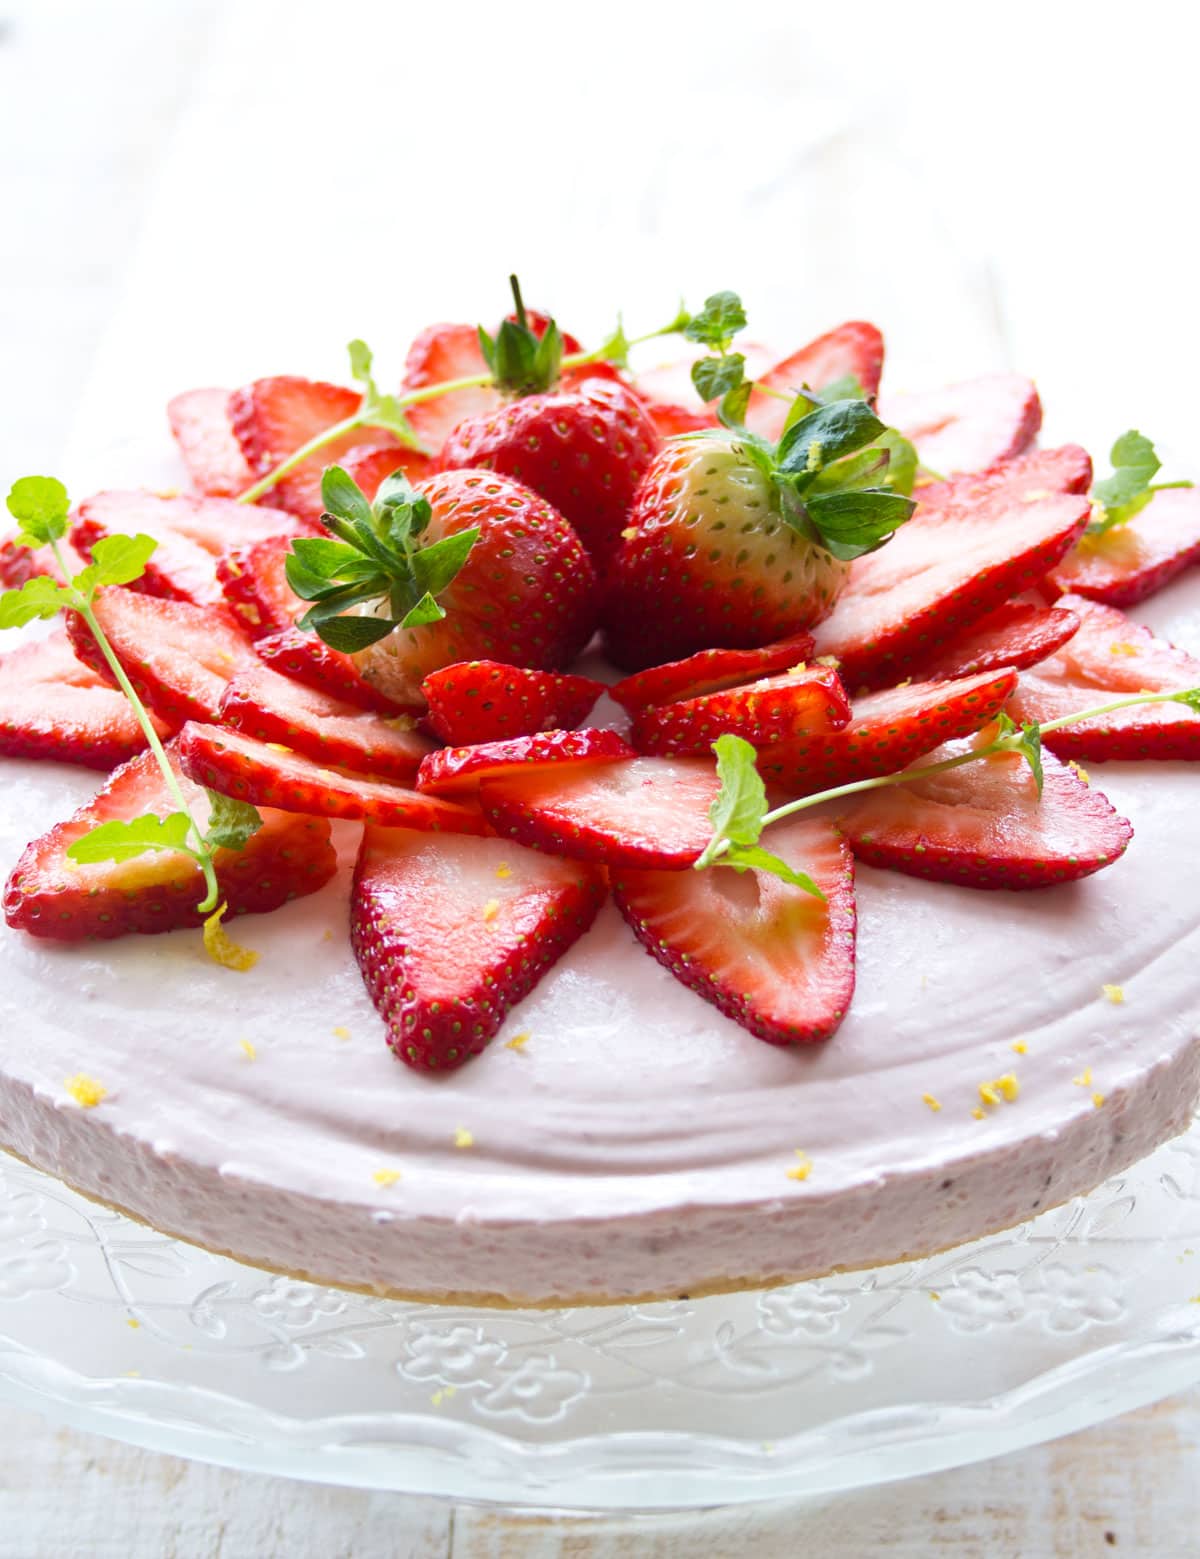 A strawberry cheesecake topped with sliced and whole strawberries.